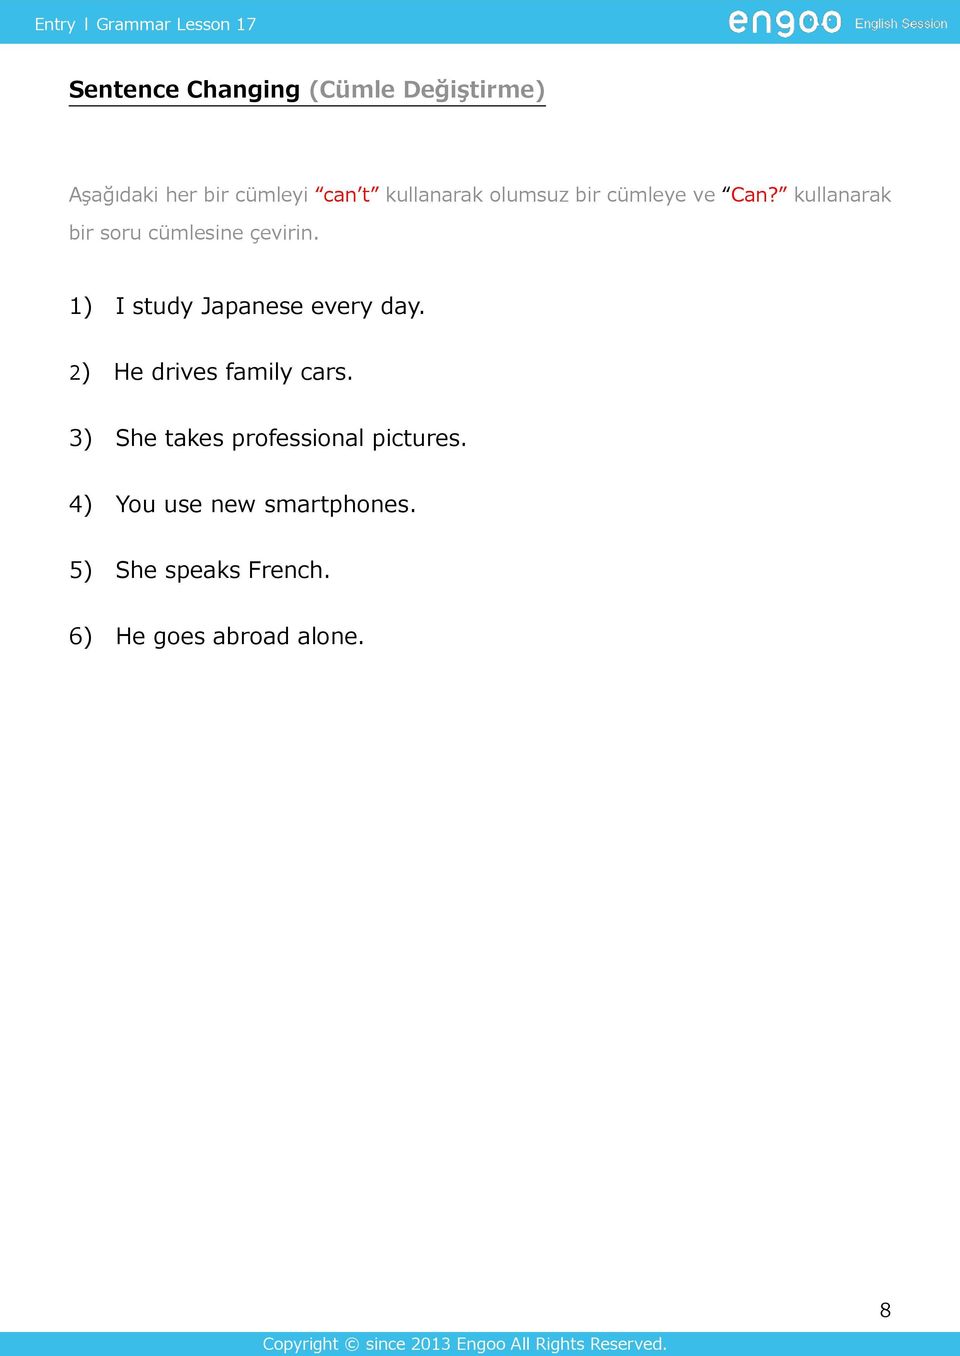 1) I study Japanese every day. 2) He drives family cars.